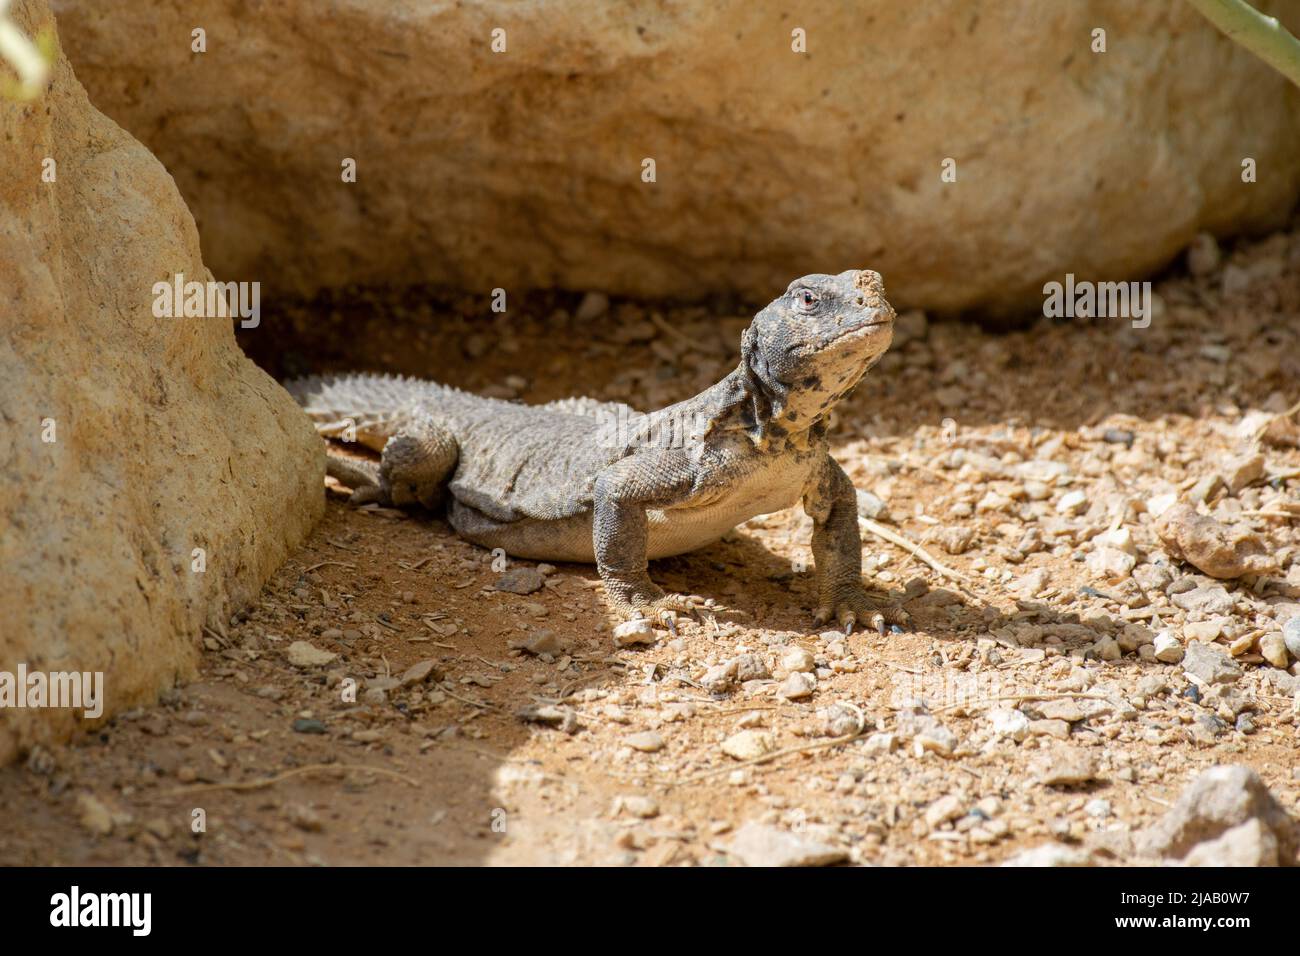 A green Leiptien's Spiny Tailed Lizard (Uromastyx aegyptia leptieni) close up peering out of the rocks. Stock Photo